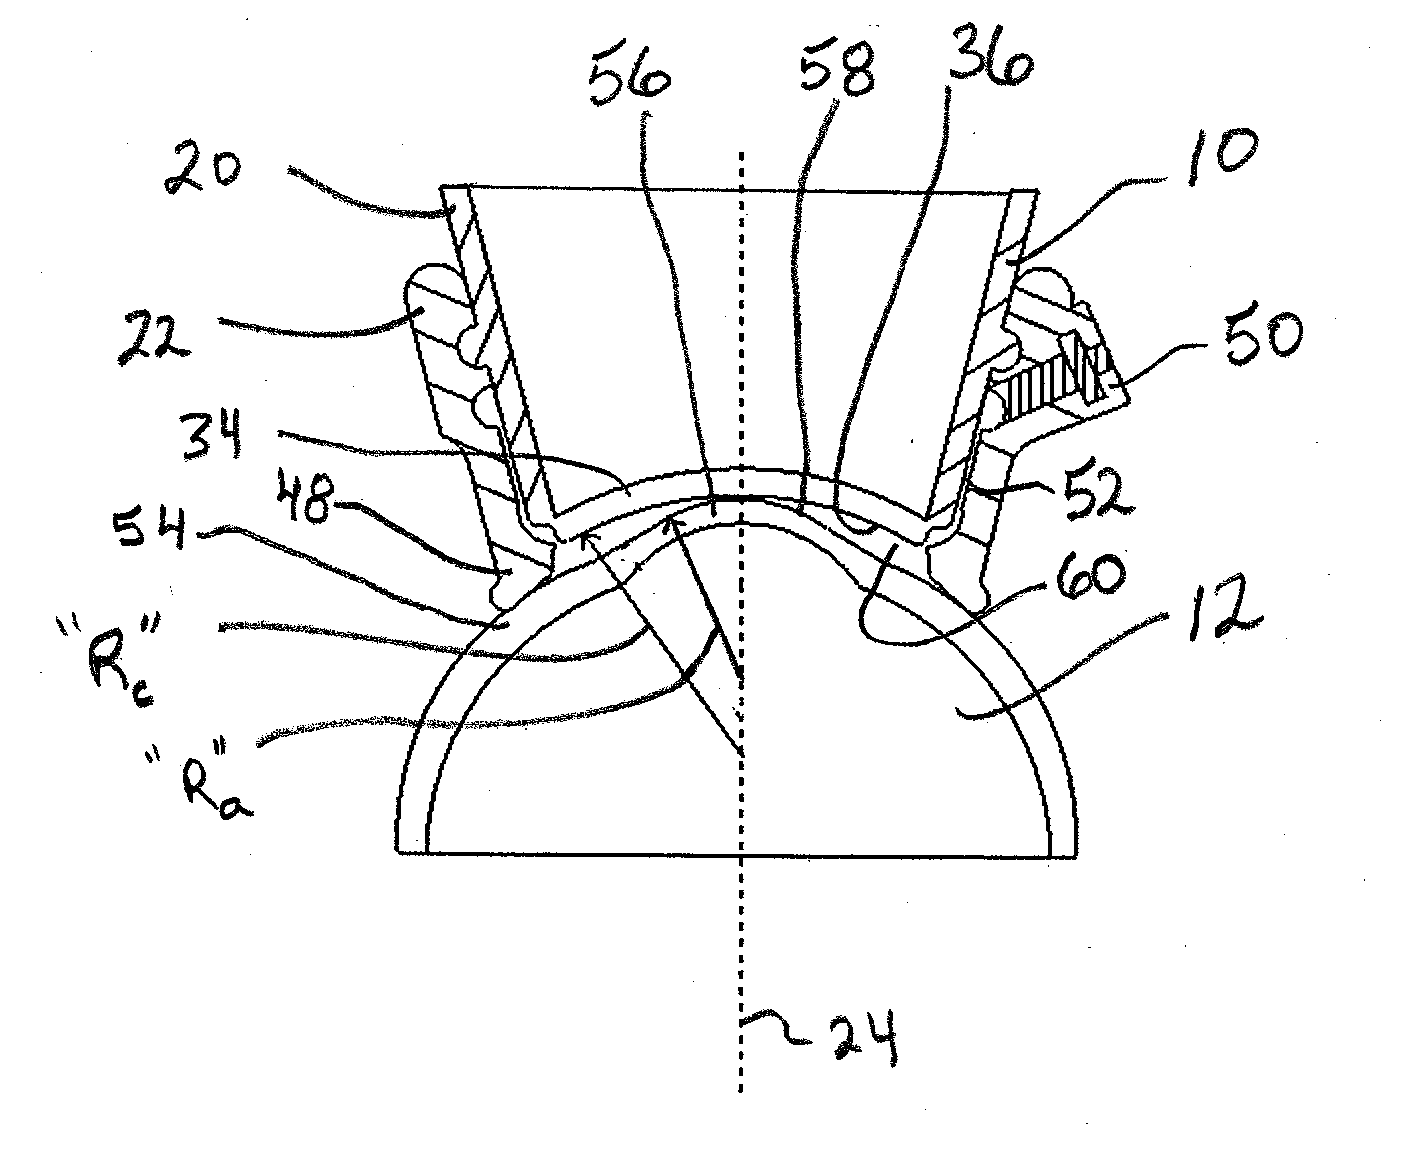 System and Method for Docking a Cornea with a Patient Interface Using Suction